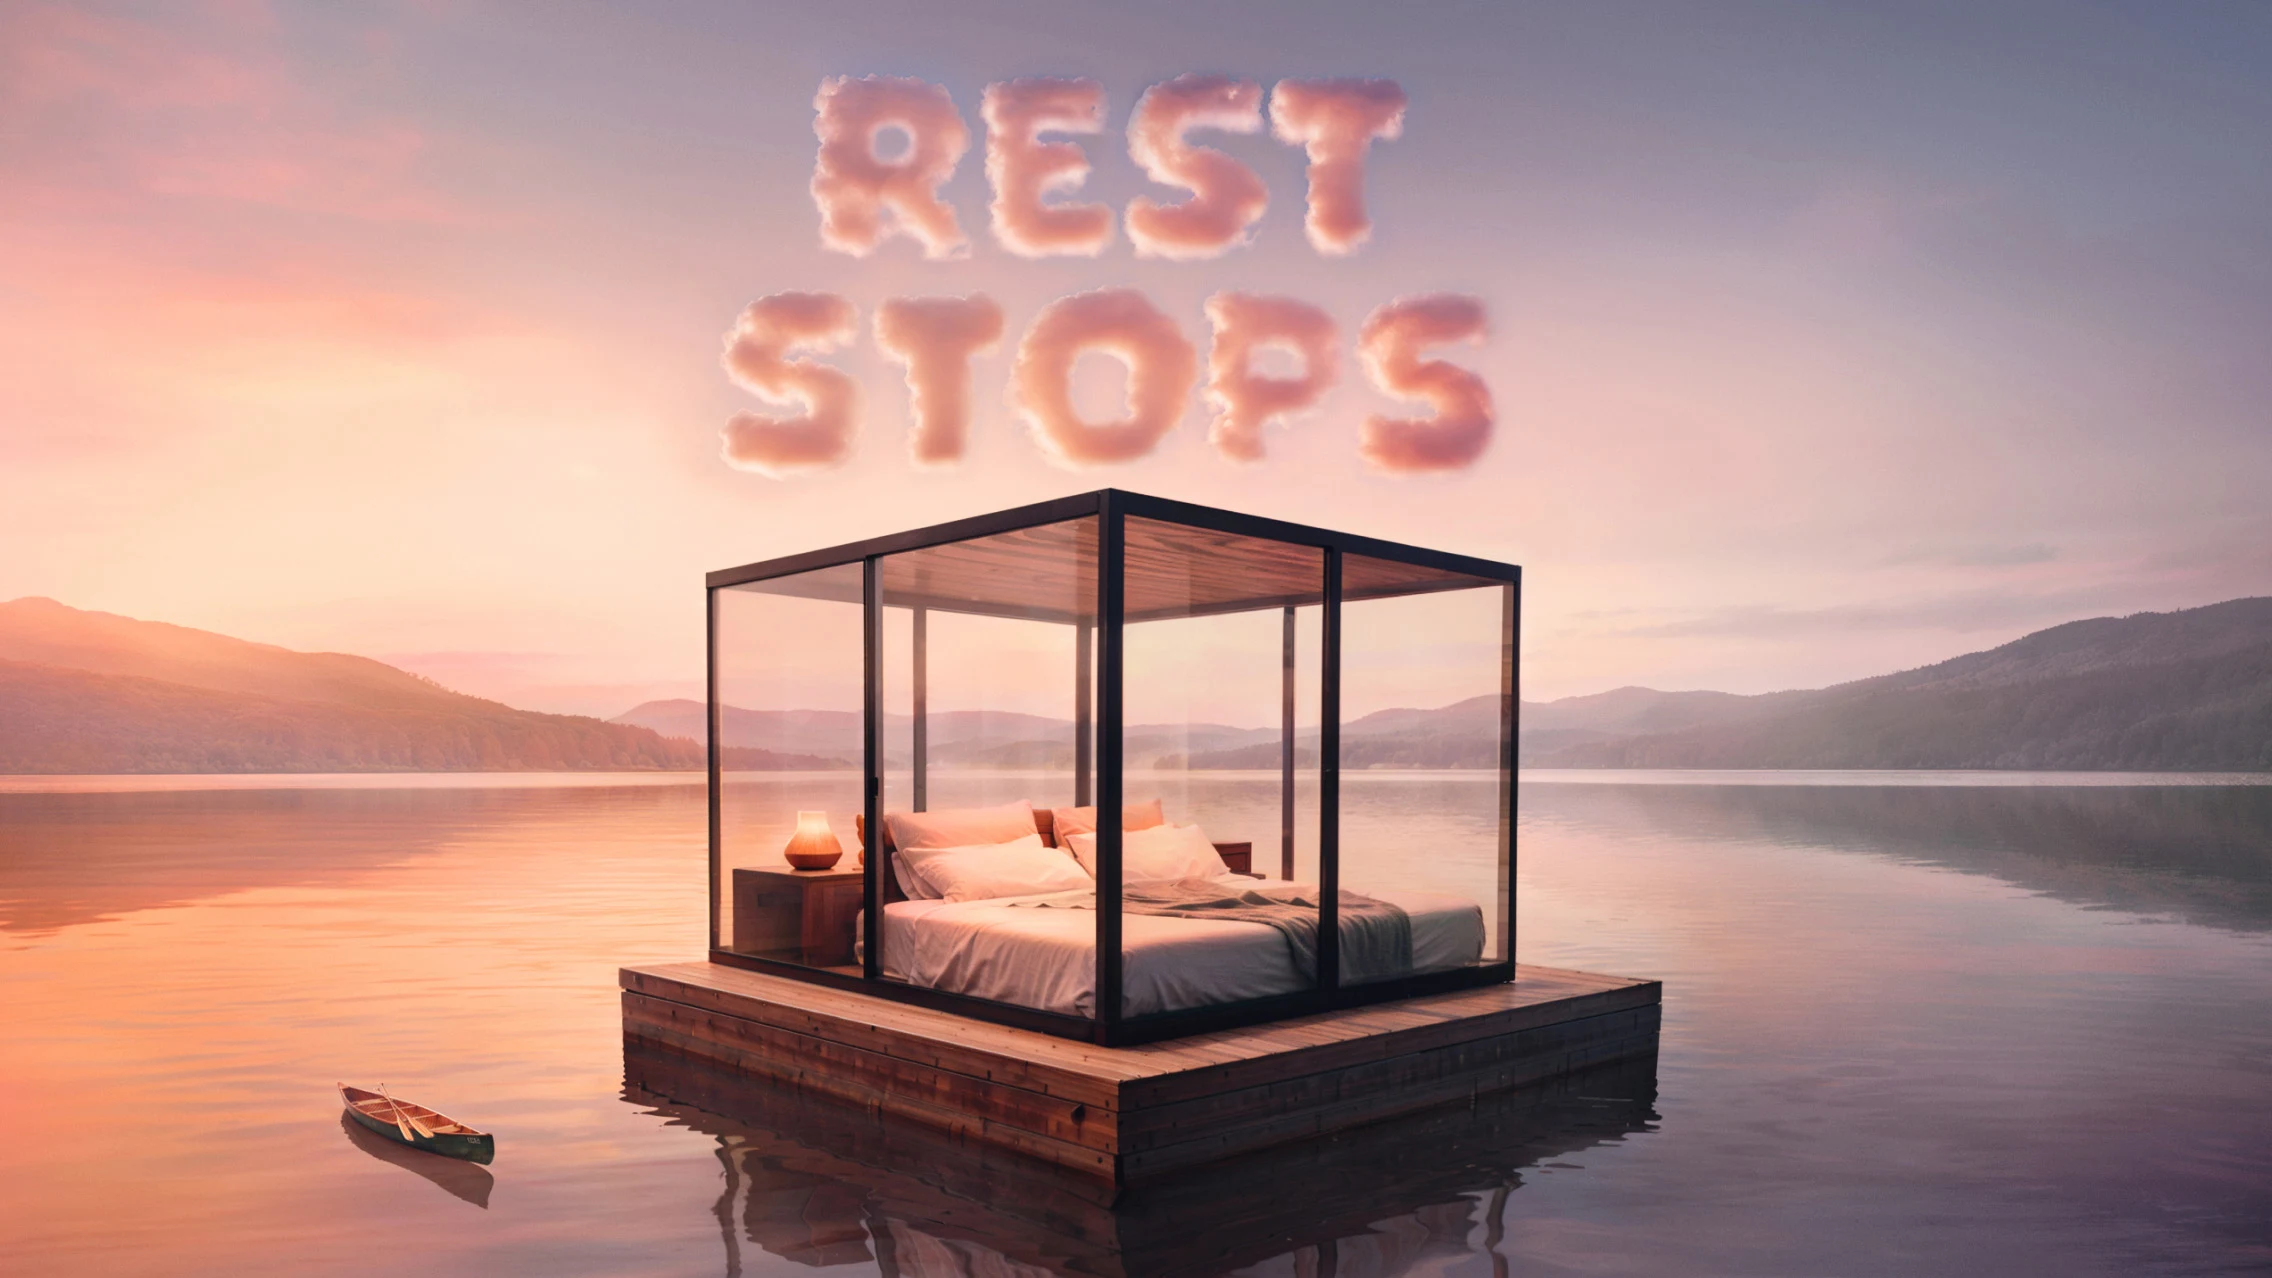 Luxurious bed enclosed in glass structure on top of a wooden plank floating in a serene lake. “Rest Stops” is written in puffy white clouds in the sky.